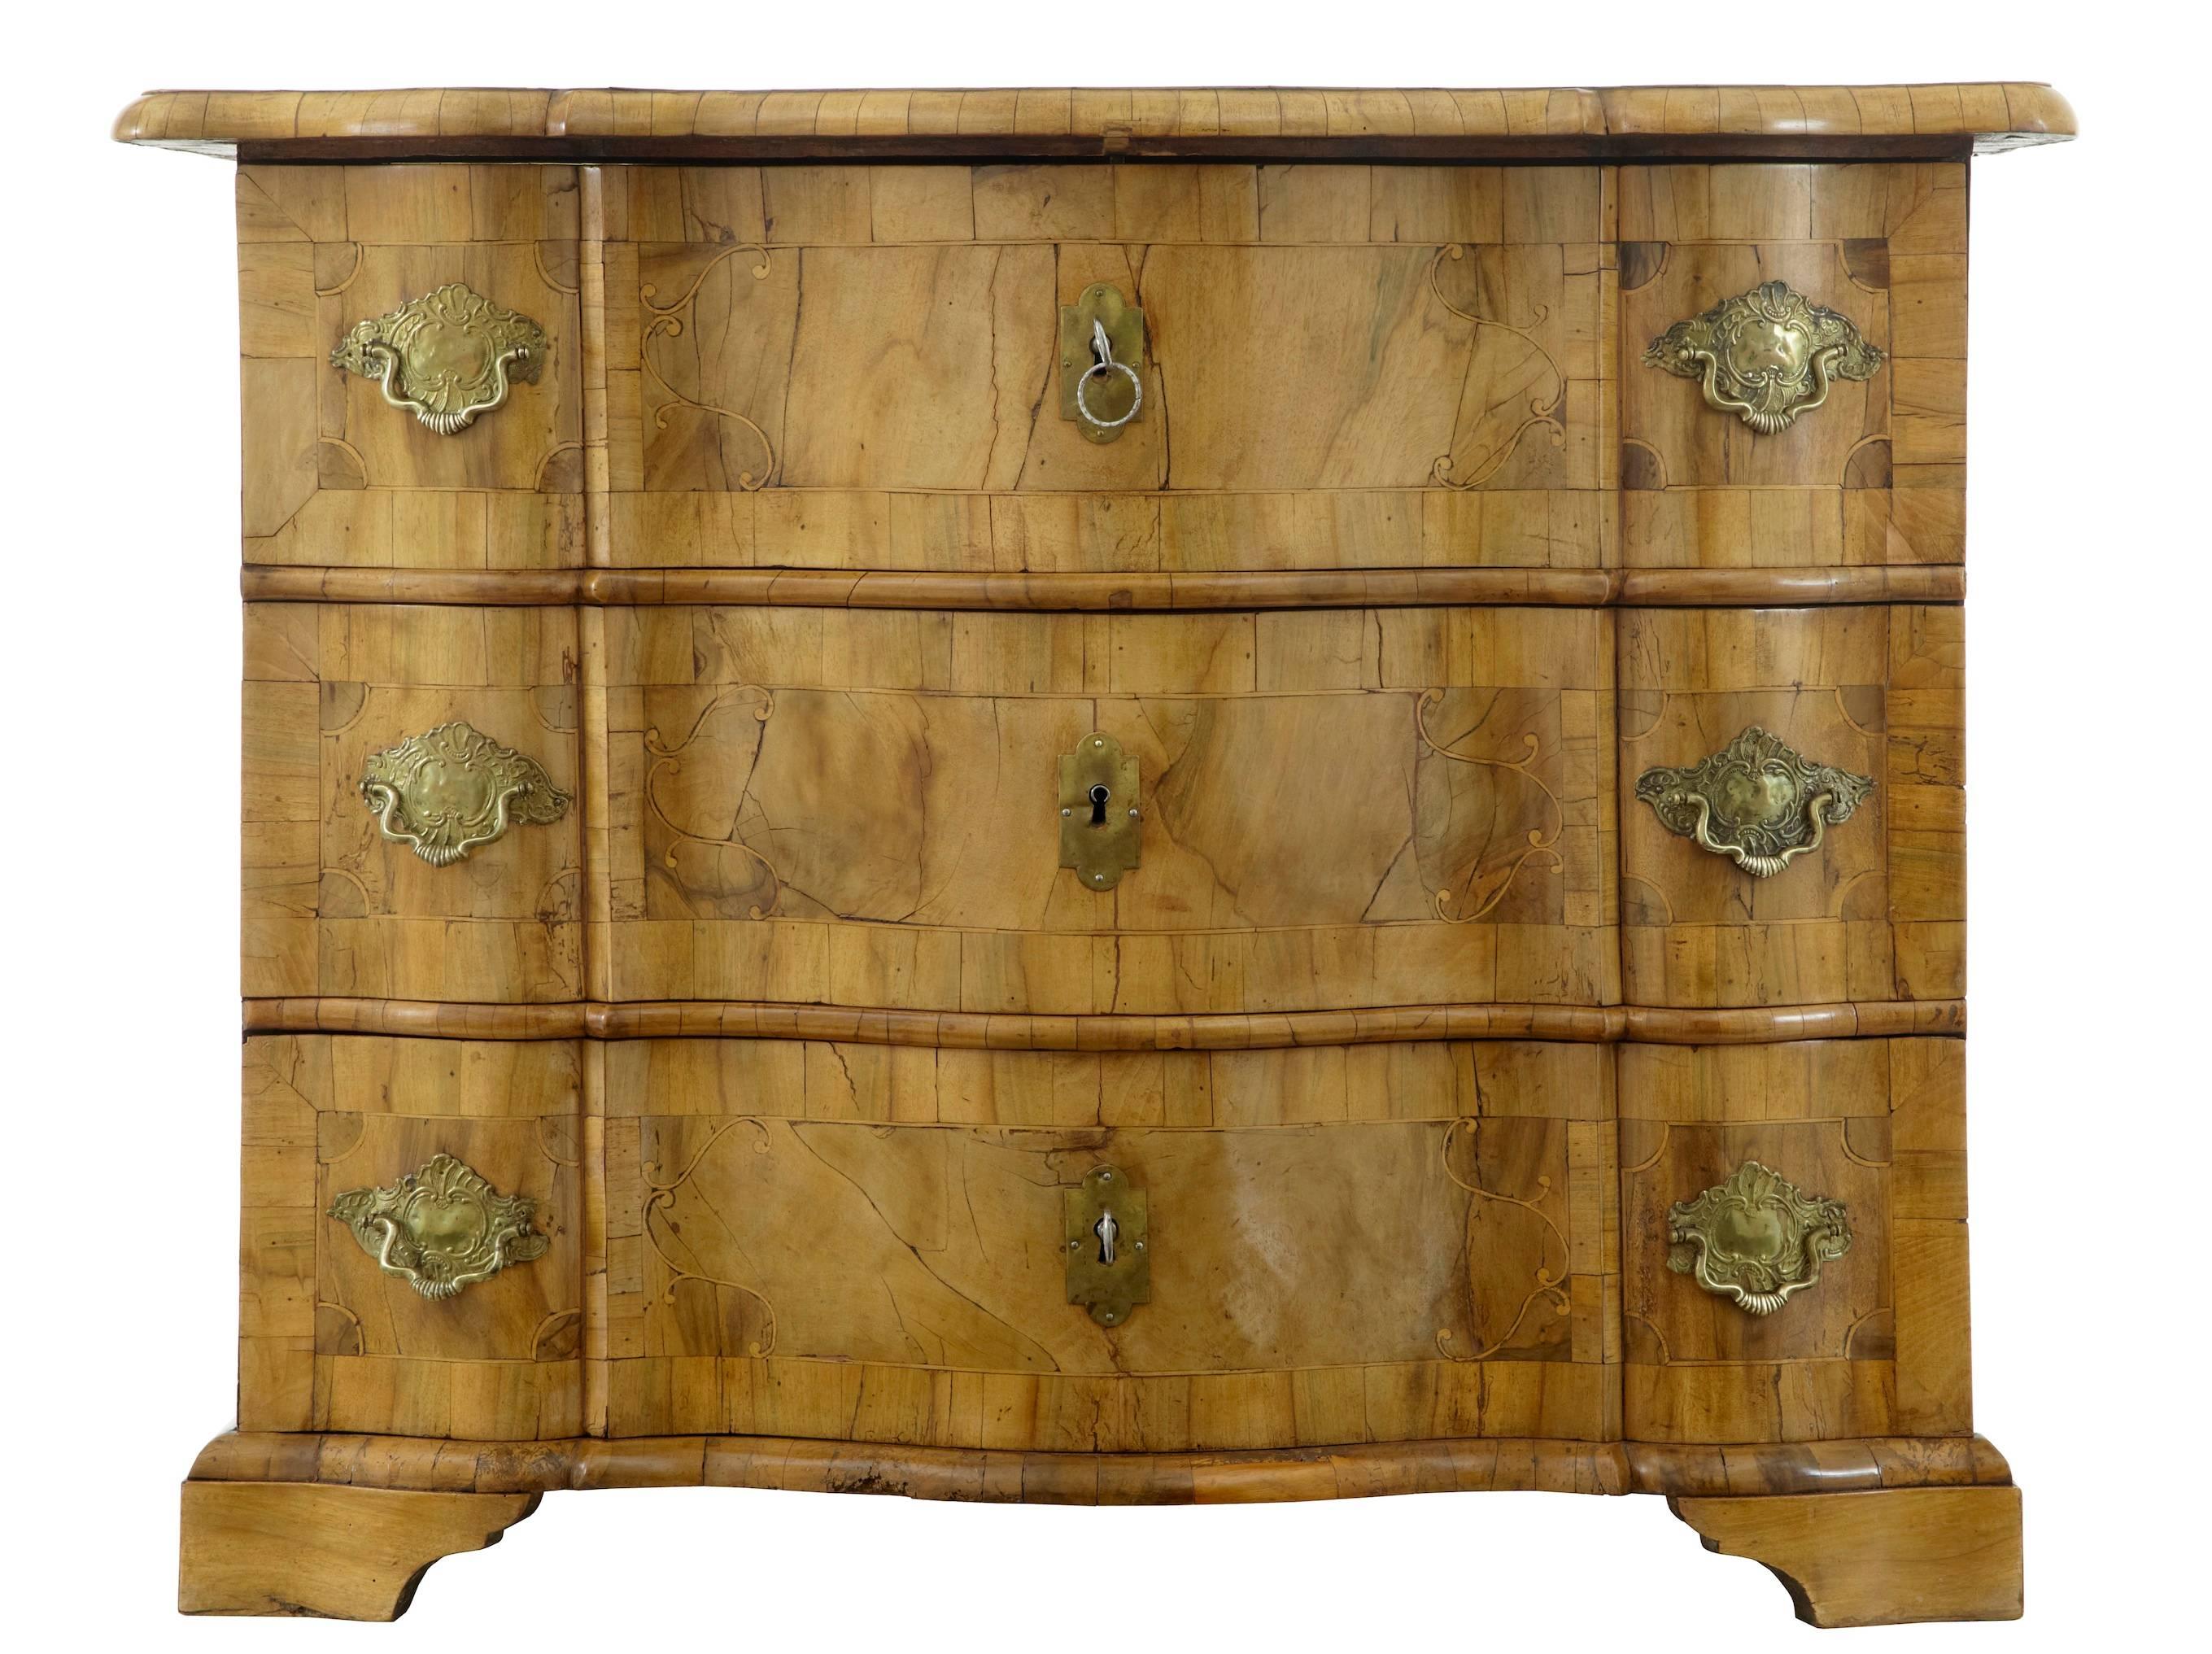 Fine quality Swedish commode, circa 1730.
Beautiful natural color on this commode which has taken nearly 300 years to develop.
Serpentine oversailing top.
Three-drawer chest with inlaid front. The top has a inlaid hunting scene.

Replaced back